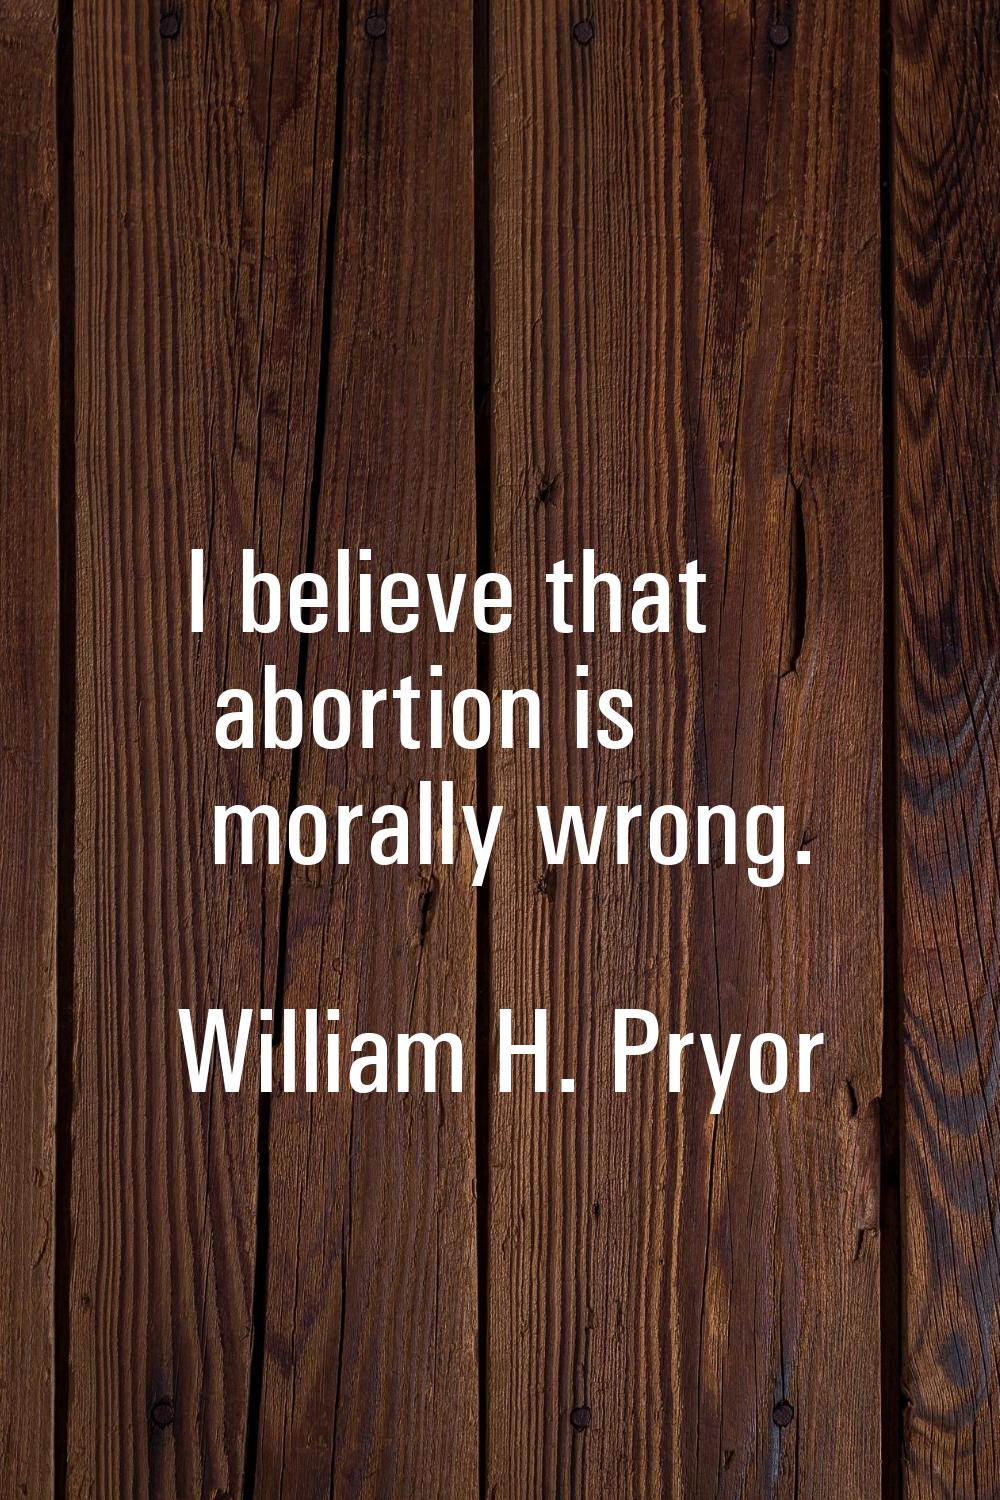 I believe that abortion is morally wrong.